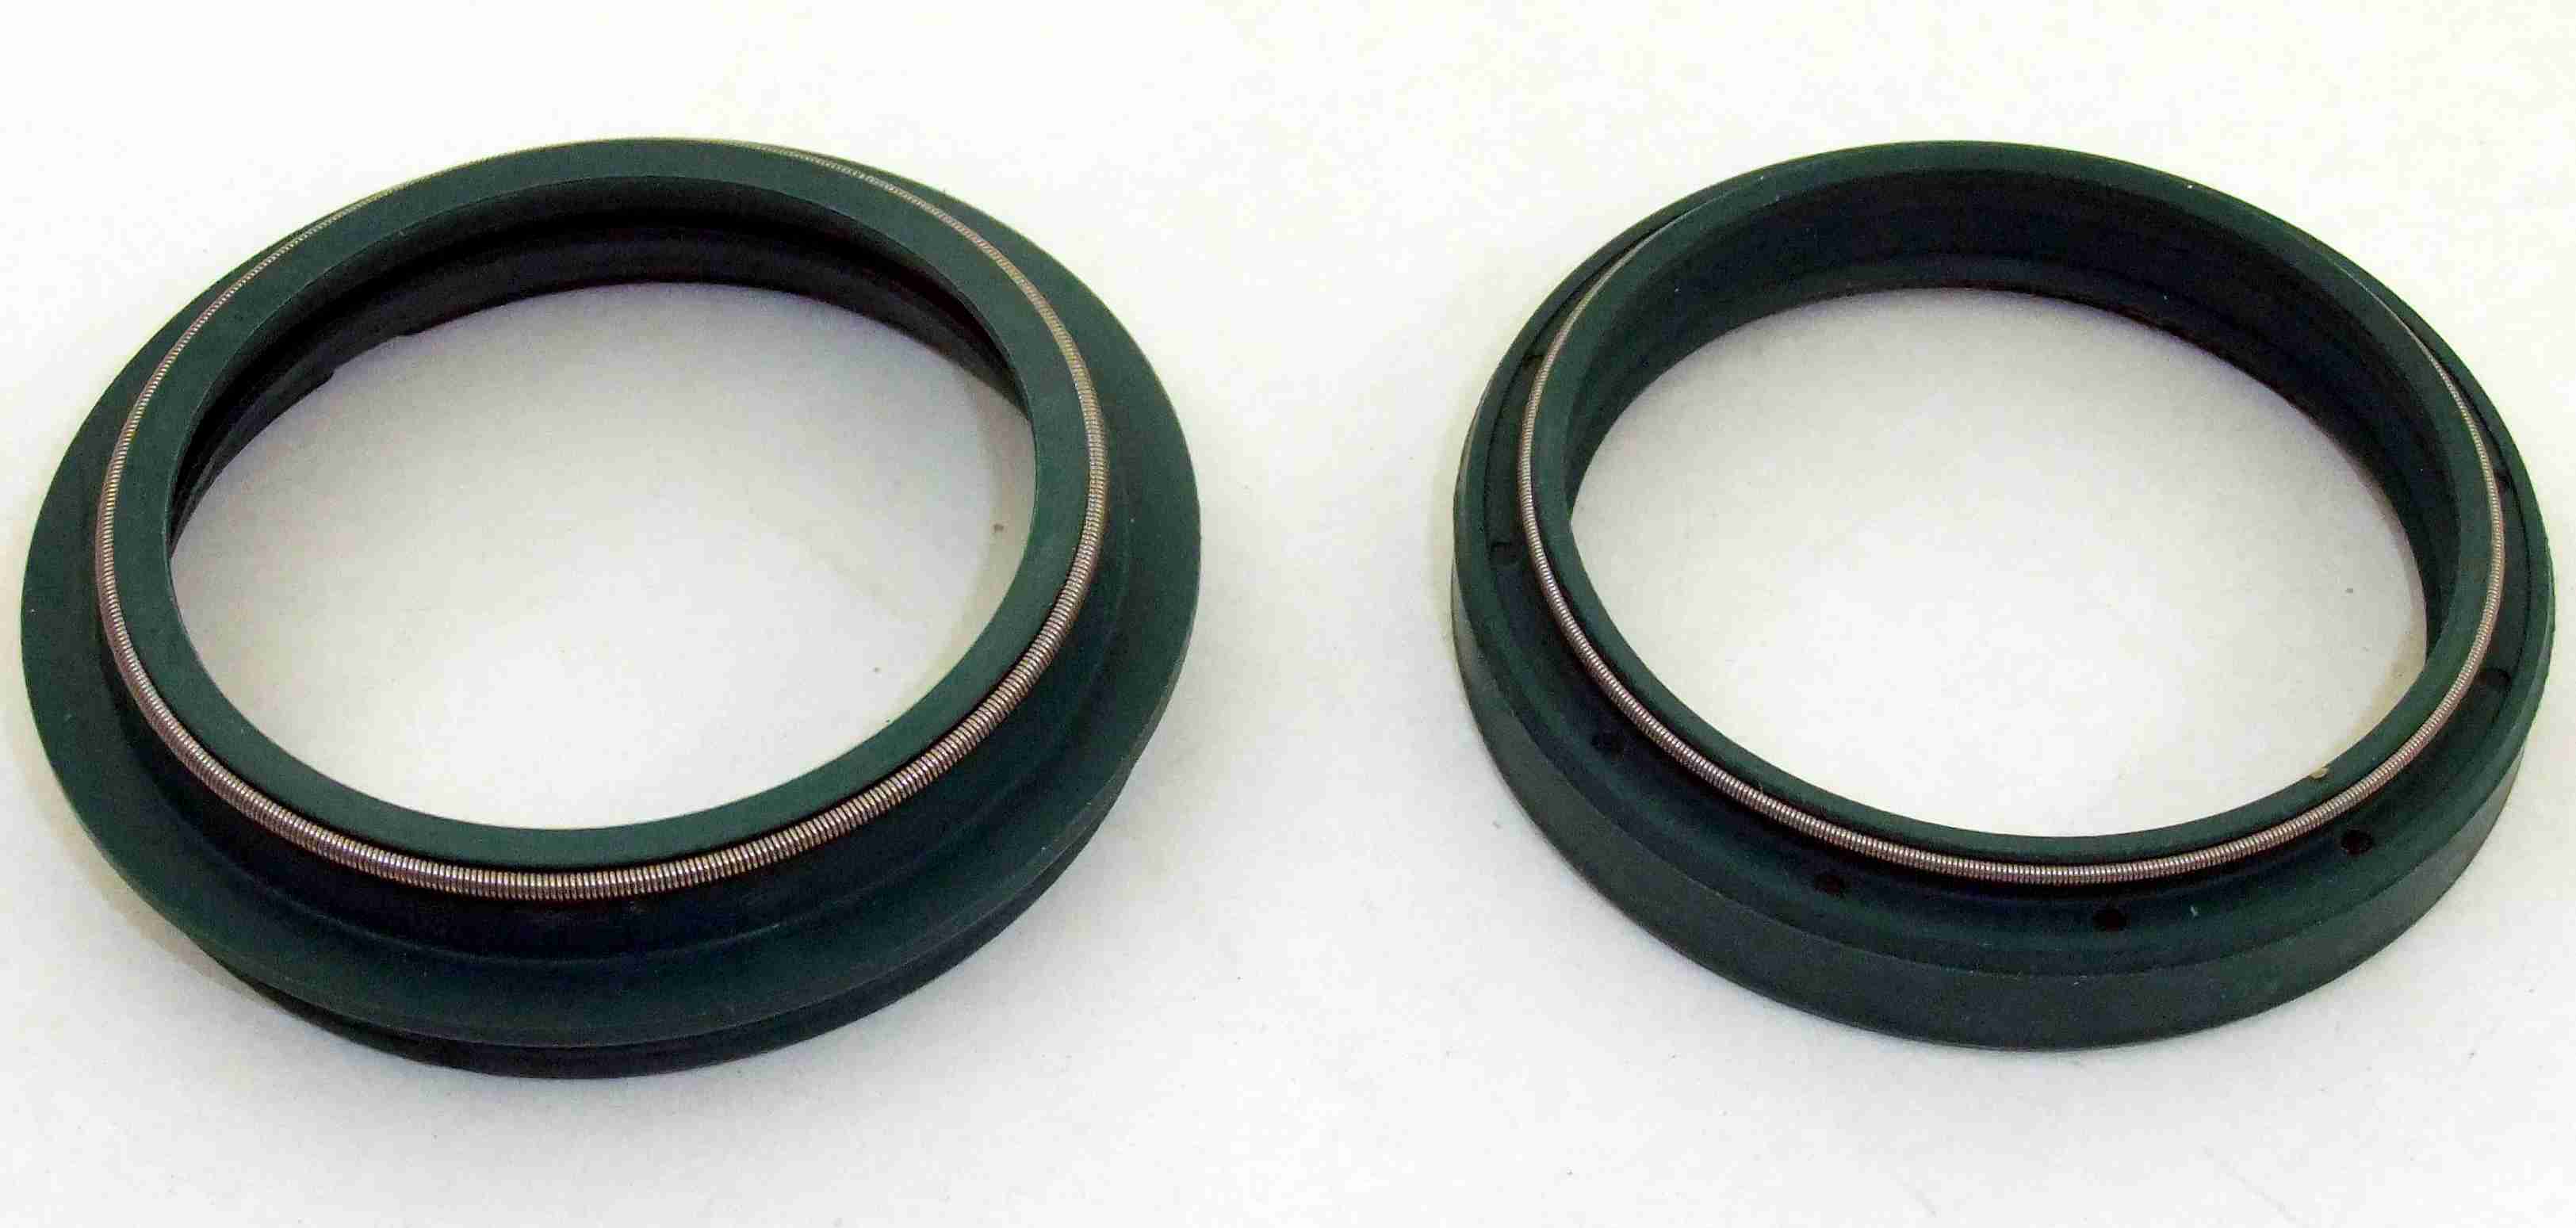 SKF FRONT FORK SEAL/DUSTCAP KIT FOR ONE SIDE, HD HEAVY DUTY FOR VERY DIRTY CONDITIONS SHOWA 48